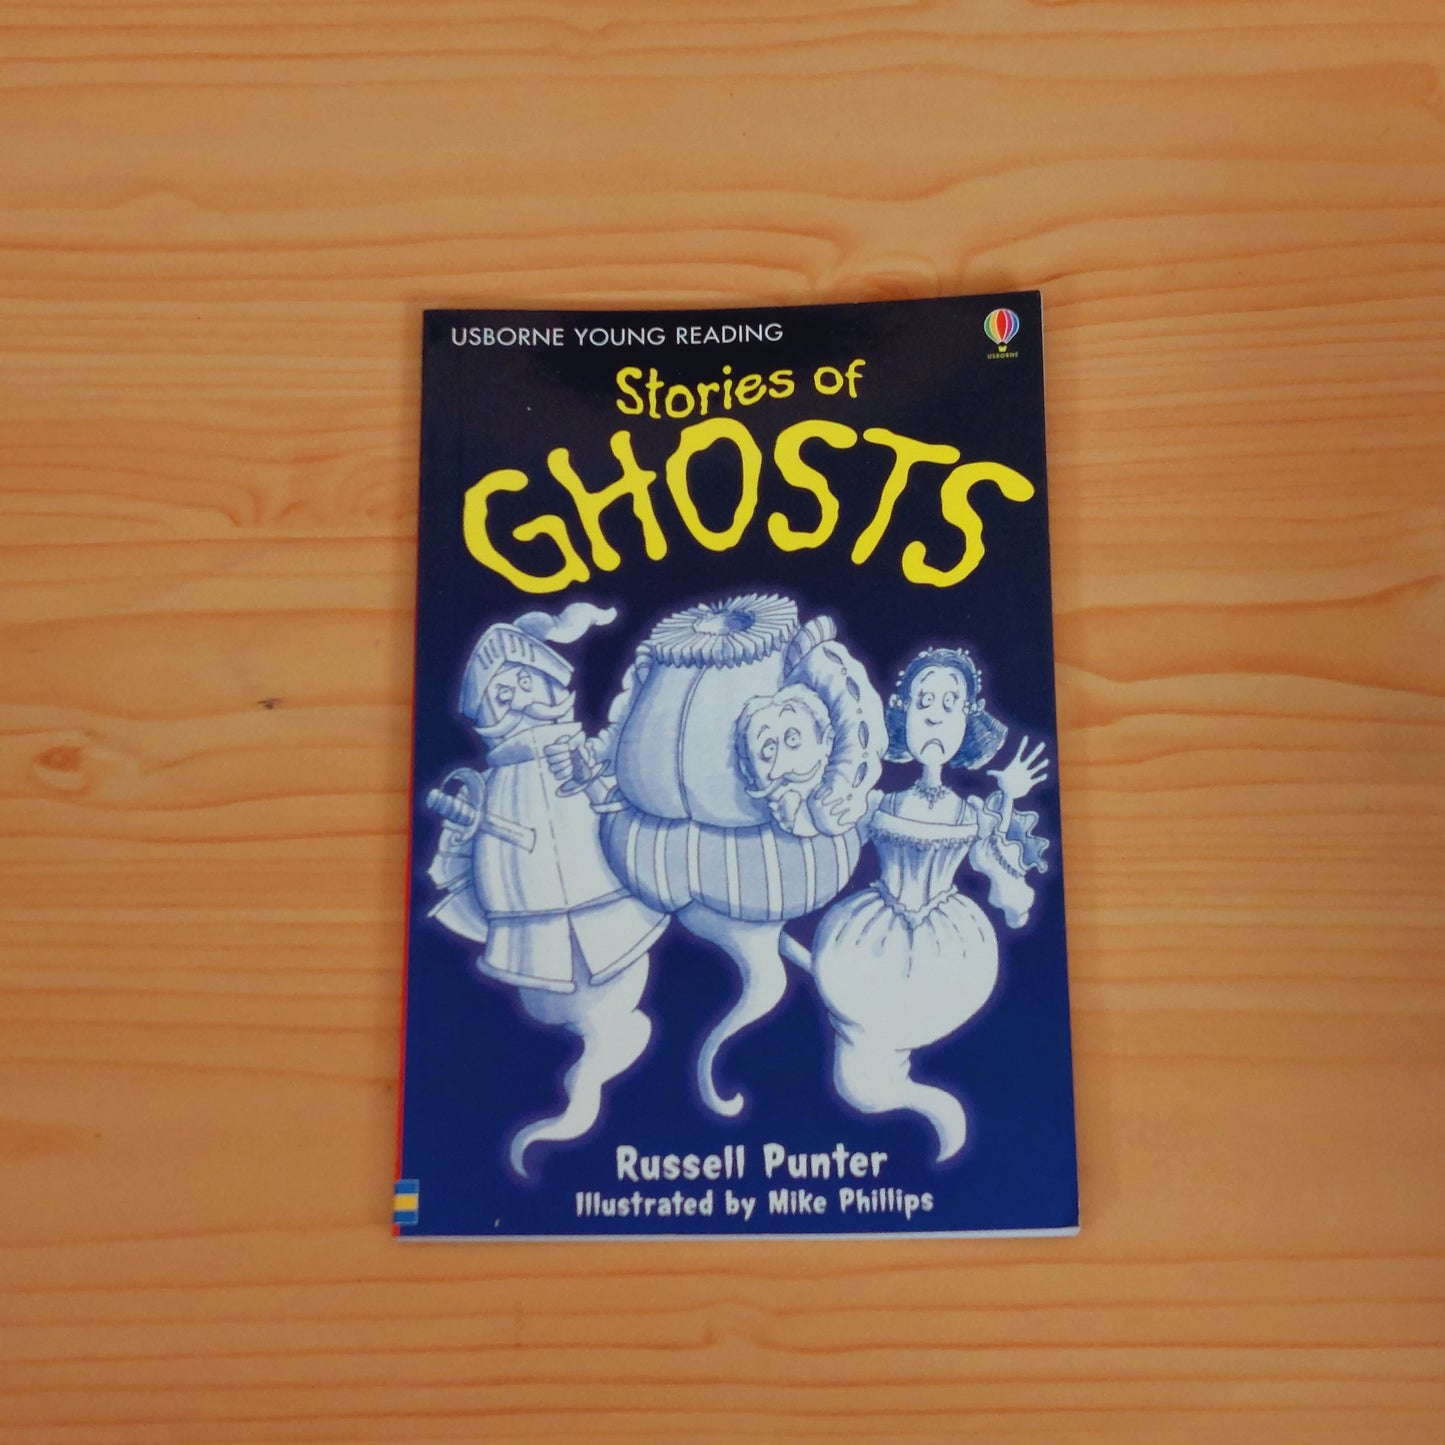 Usborne Young Reading - Stories of Ghosts